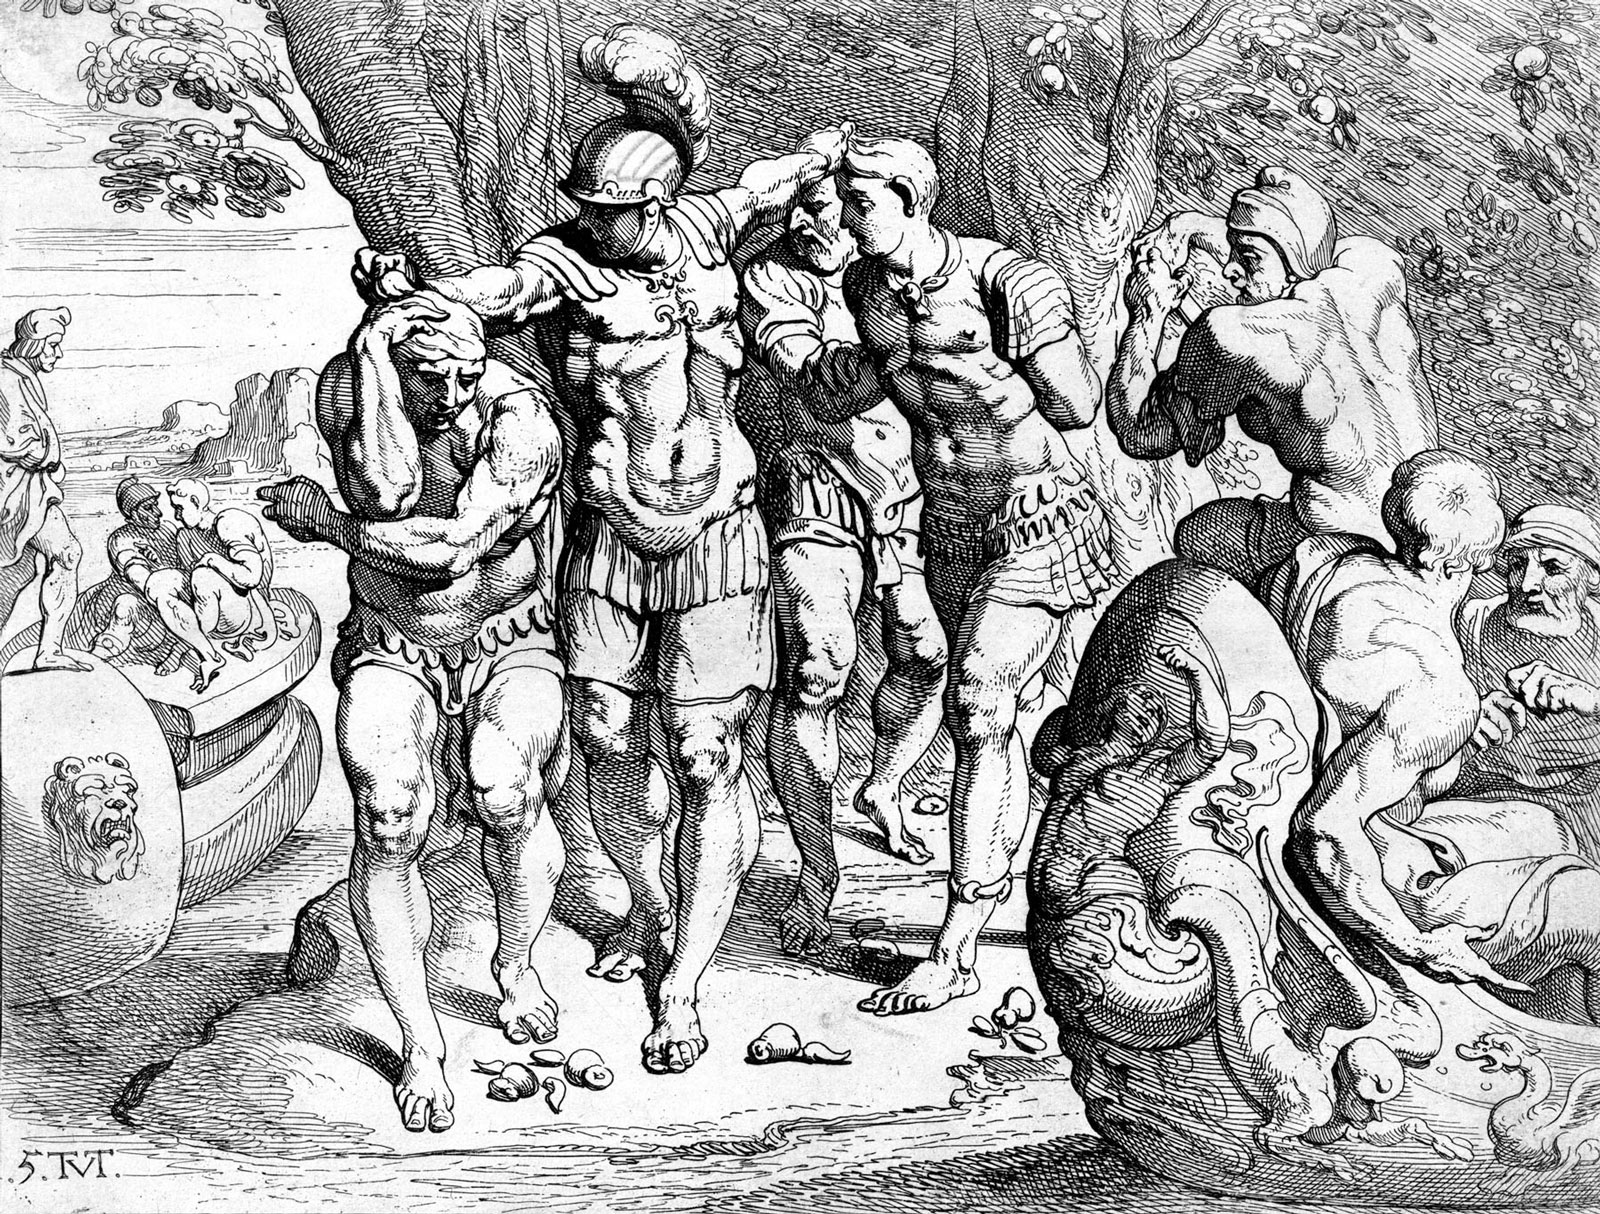  More details Odysseus removing his men from the company of the lotus-eaters.